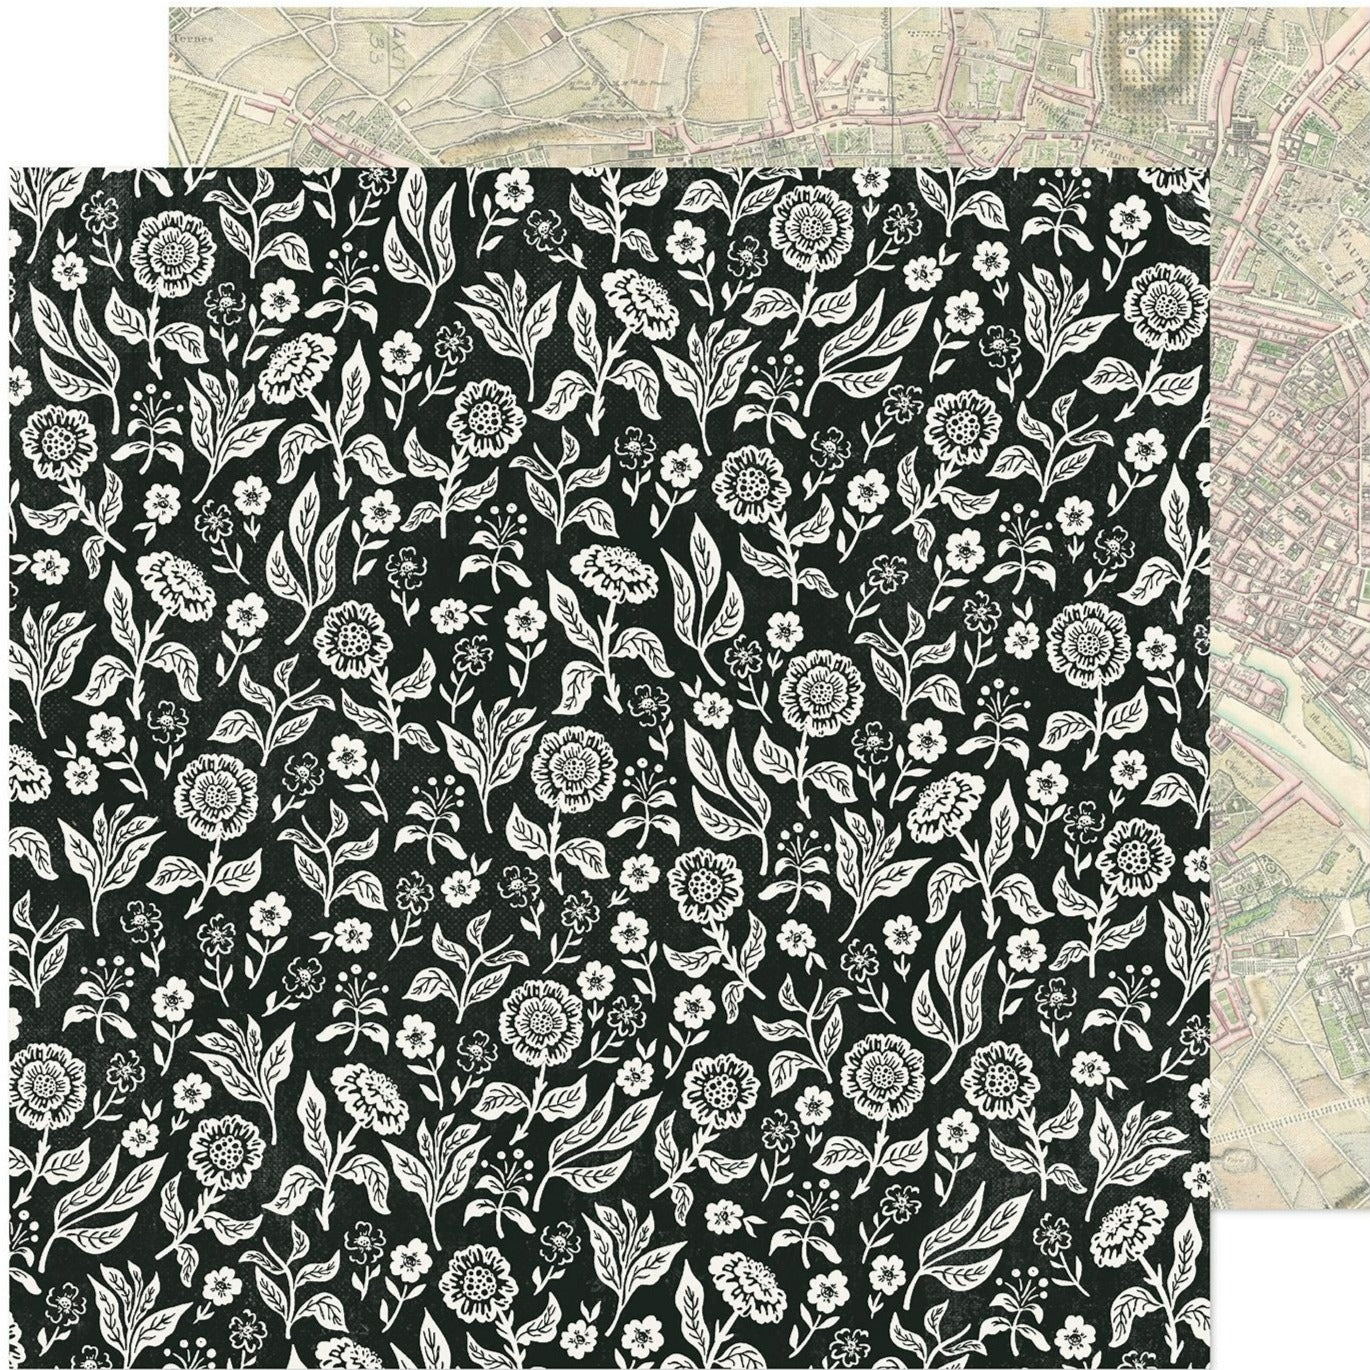 (Side A - cream floral on a black background, Side B - map of France)